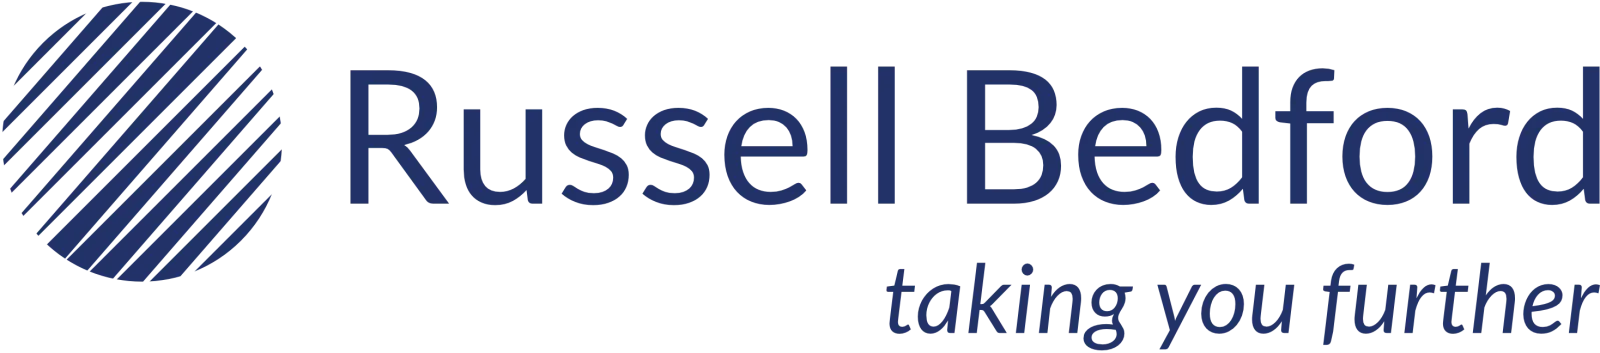 Russell Bedford logo